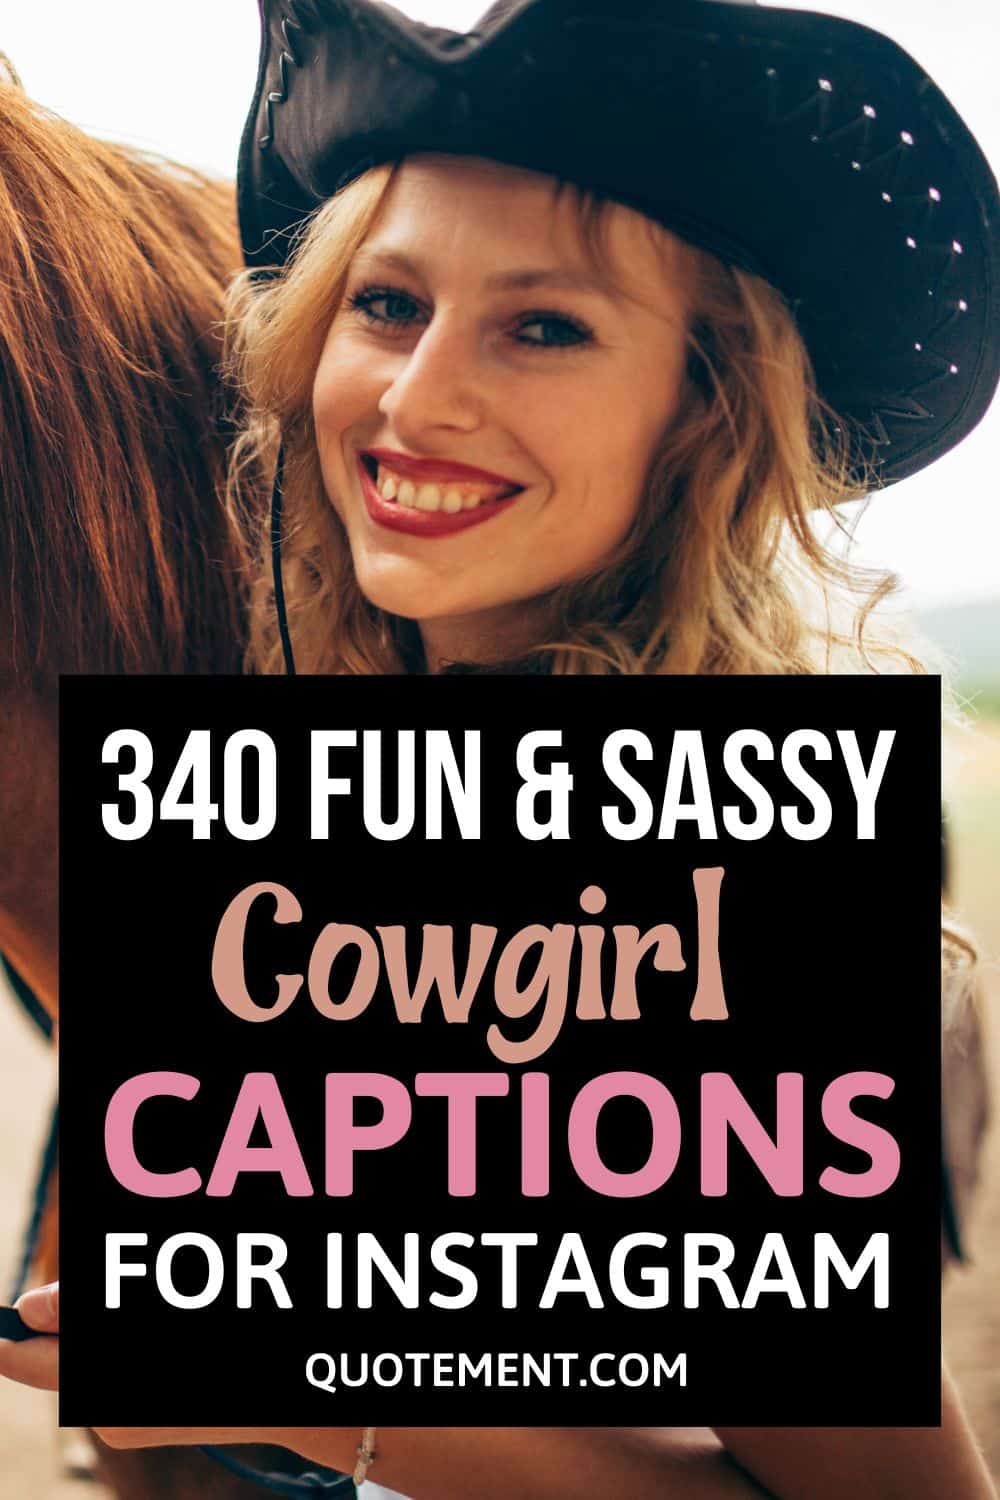 340 Fantastic Cowgirl Captions For Your Western Adventures
